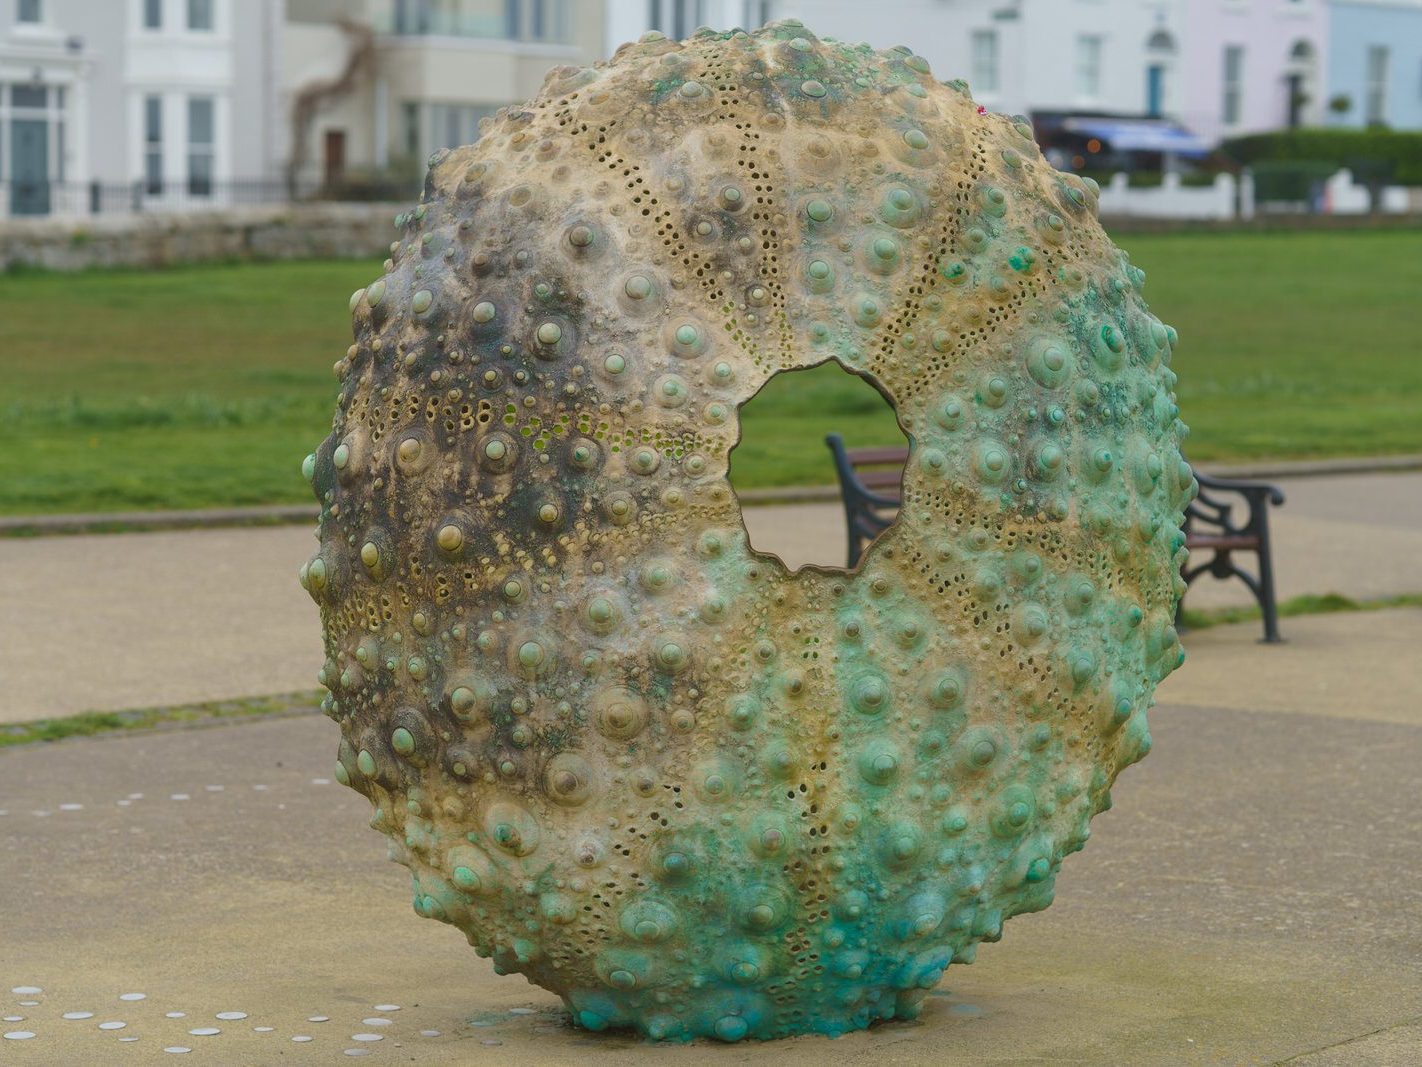 I REALLY LIKE THIS SCULPTURE BY RACHEL JOTNT [NEWTOWNSMITH IN SANDYCOVE] 003